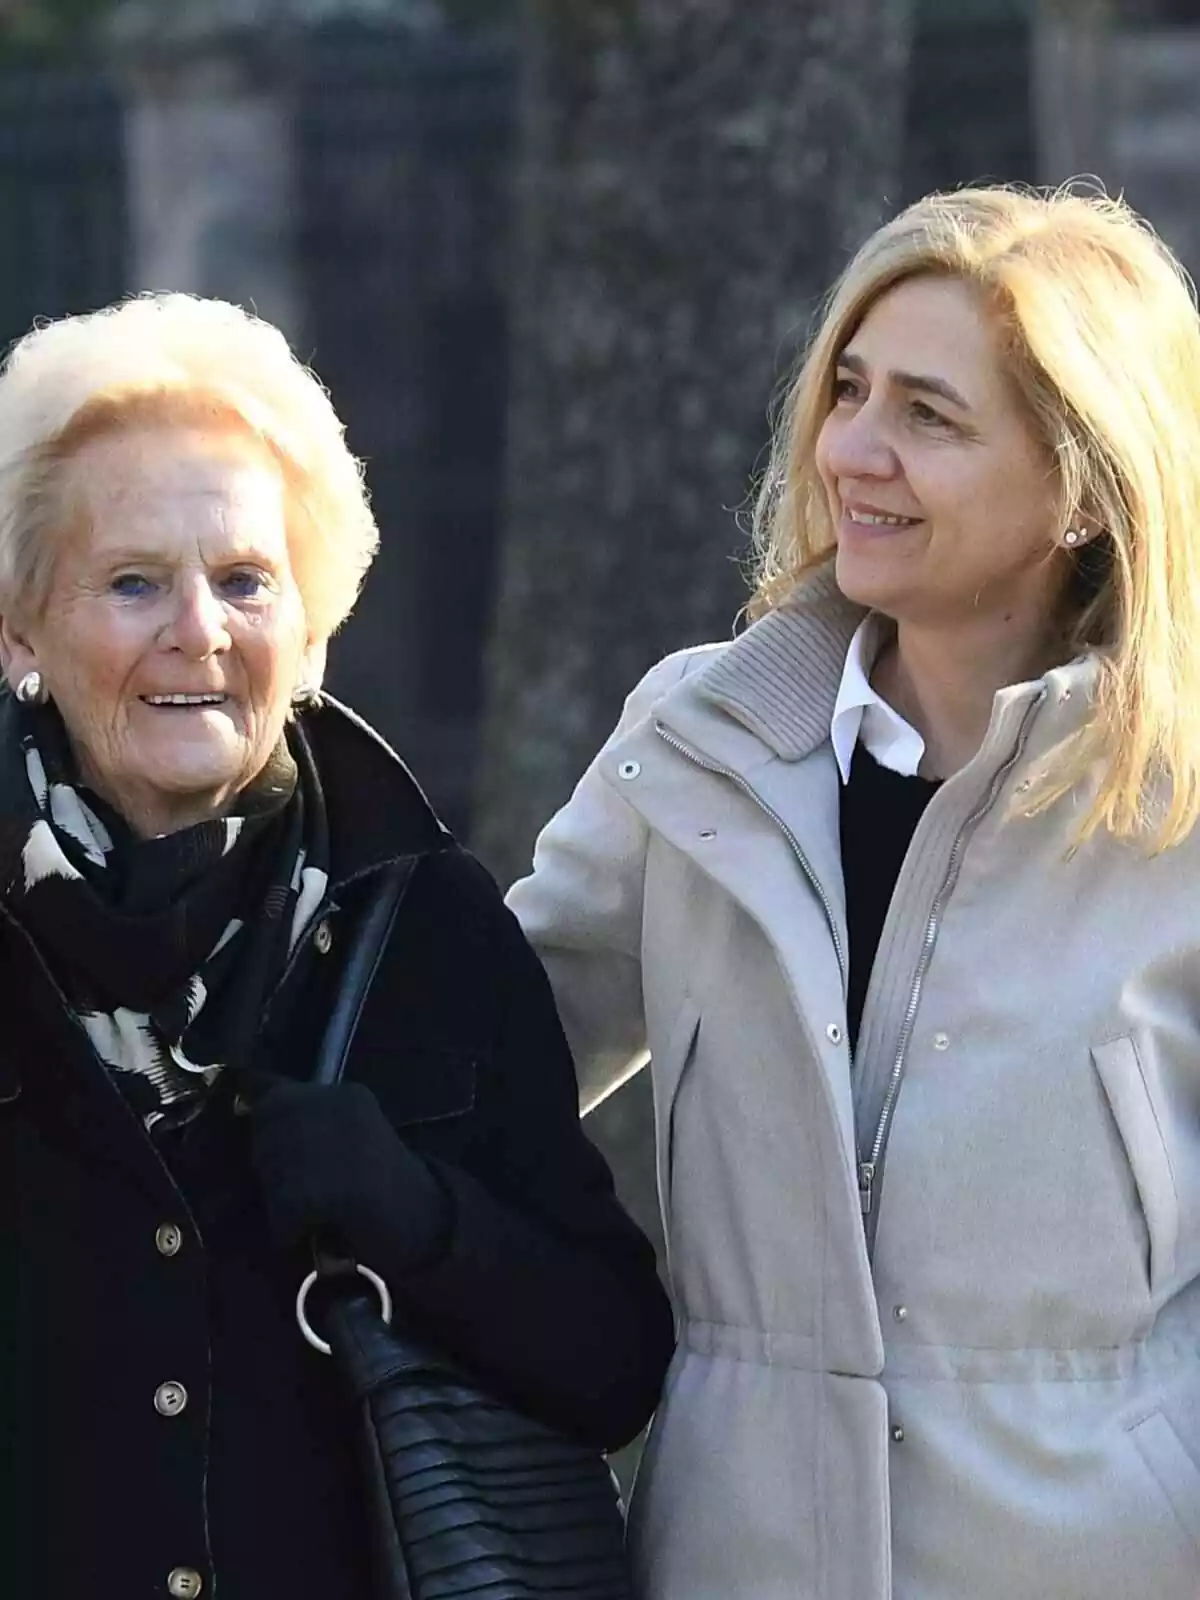 Claire Liebert and Infanta Cristina walk together, laughing